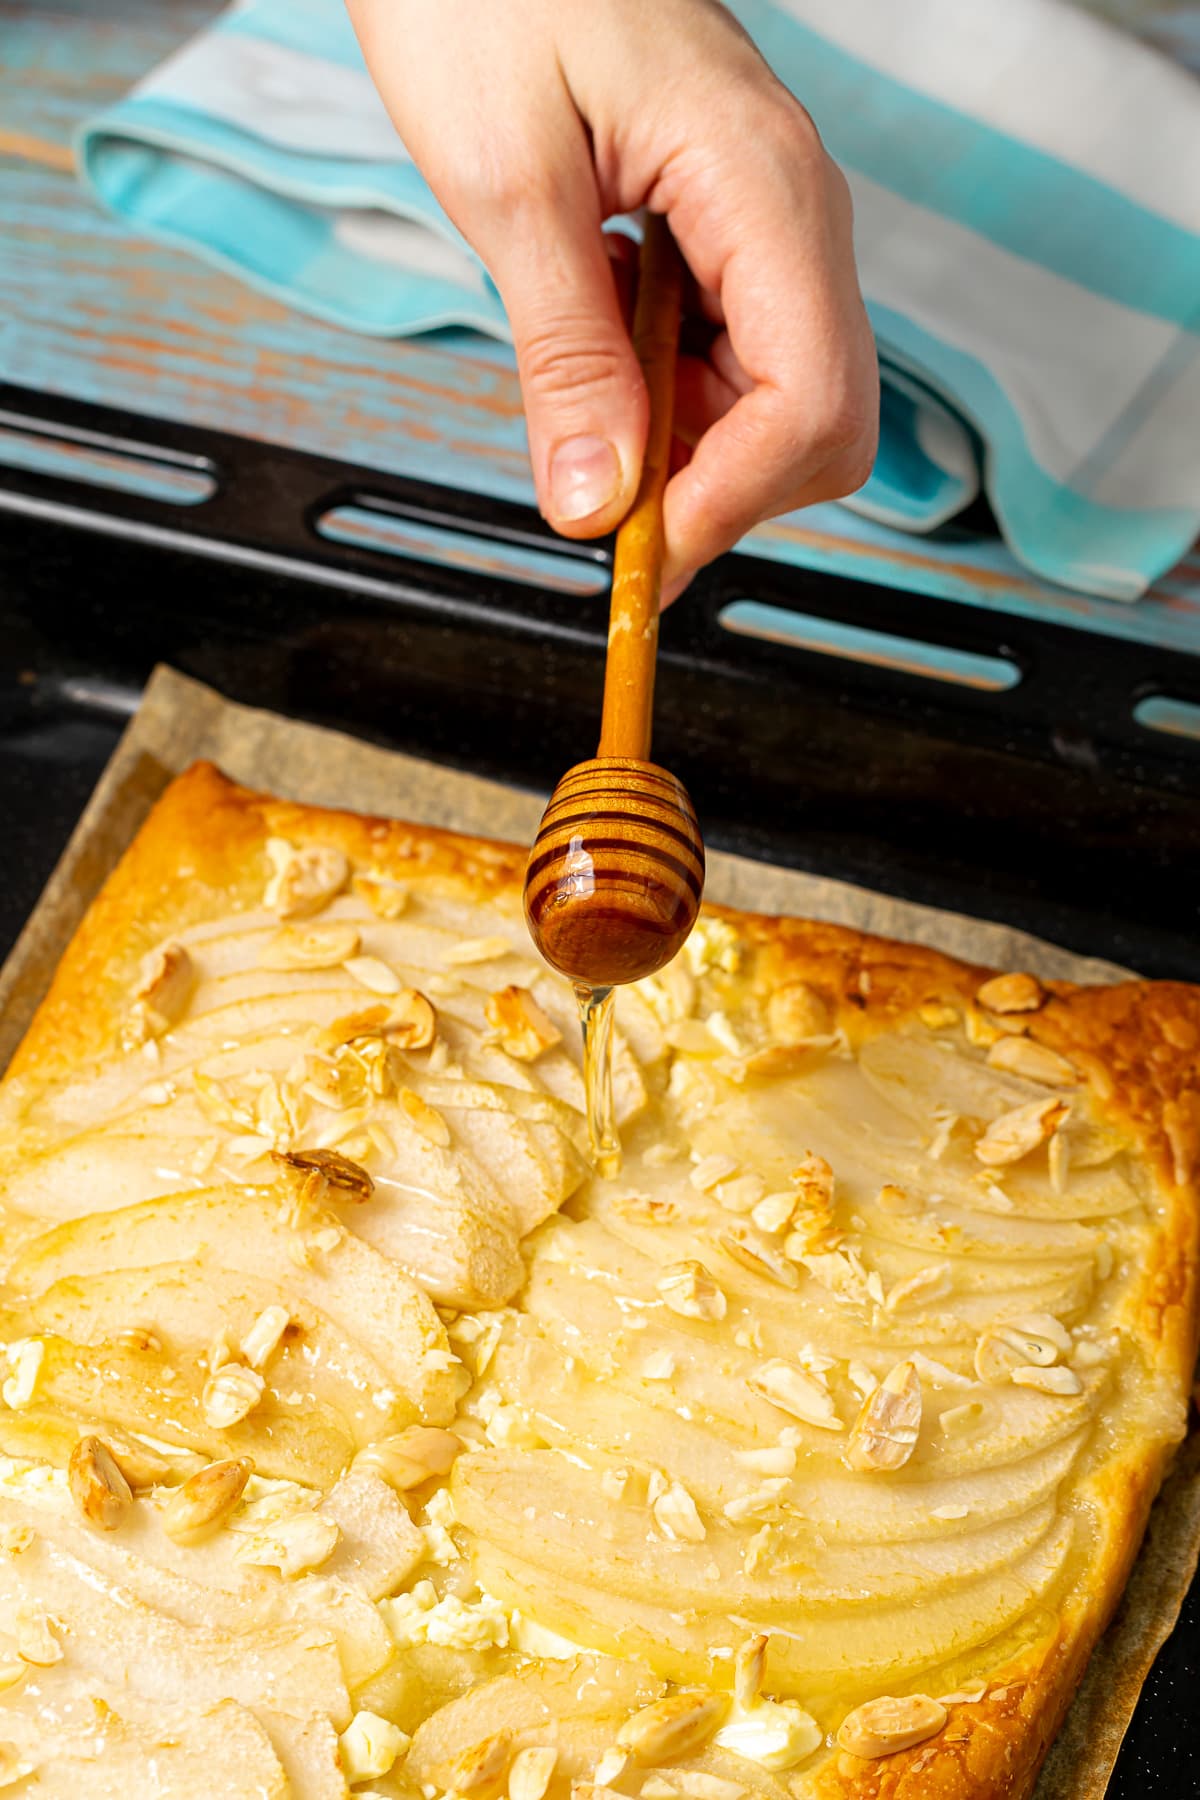 Drizzling honey over a freshly baked pear and feta tart with almond toppings.